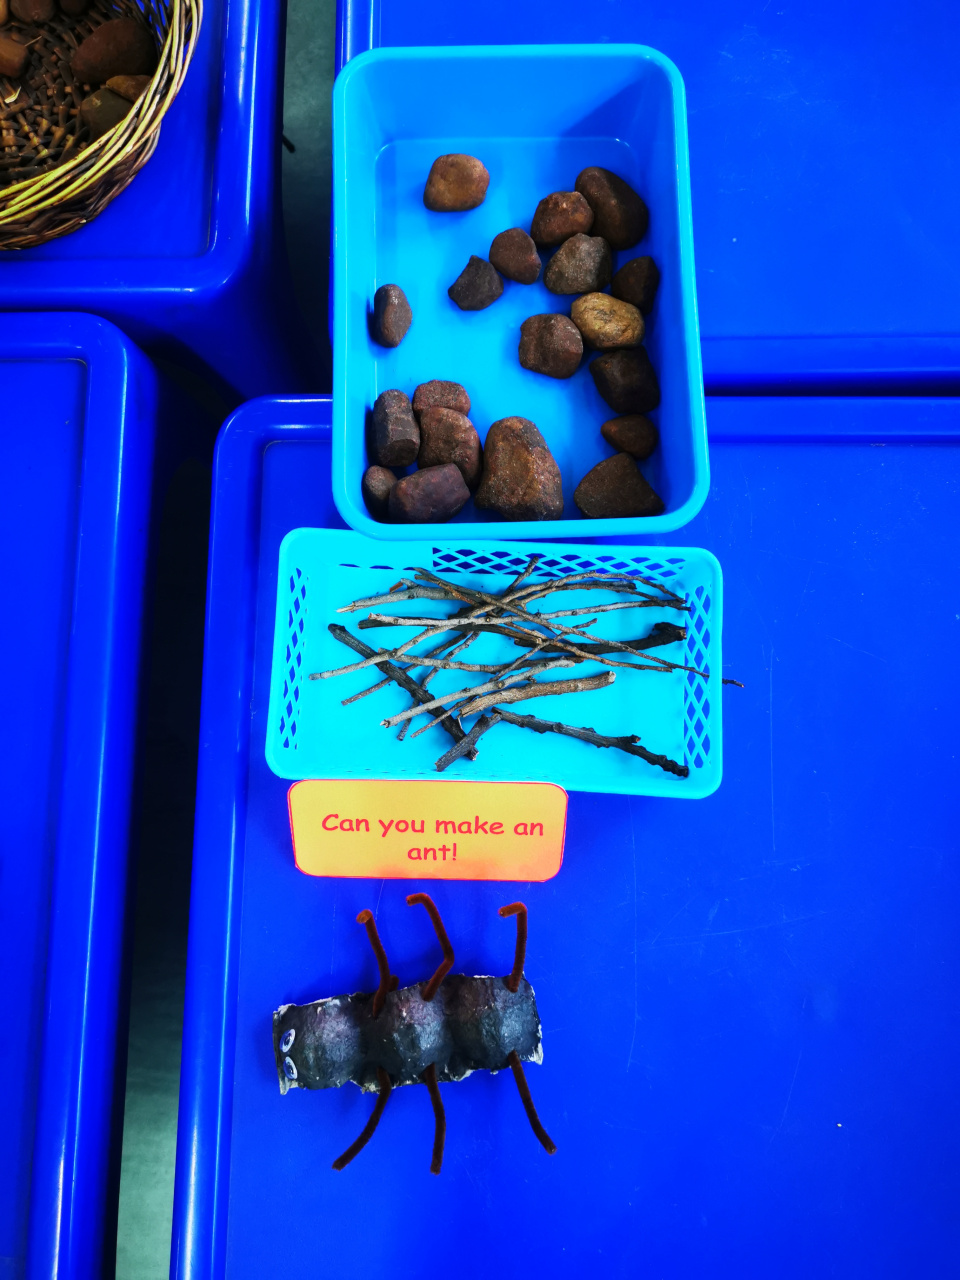 Loose parts provocation - Ants
Individual work